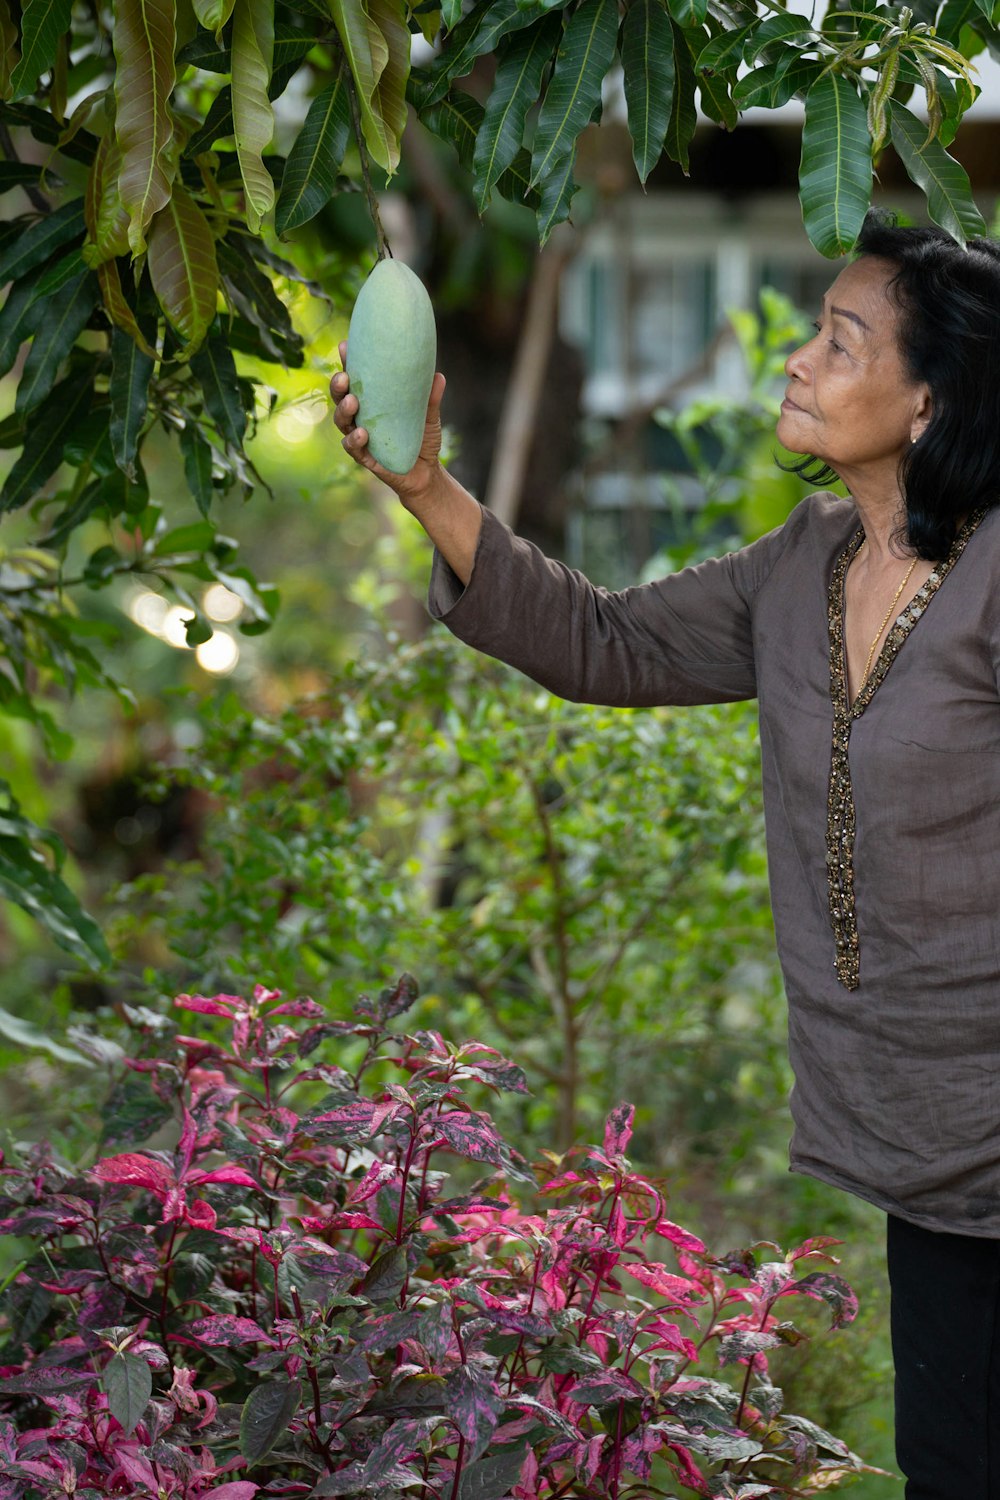 a woman holding a green fruit up to a tree